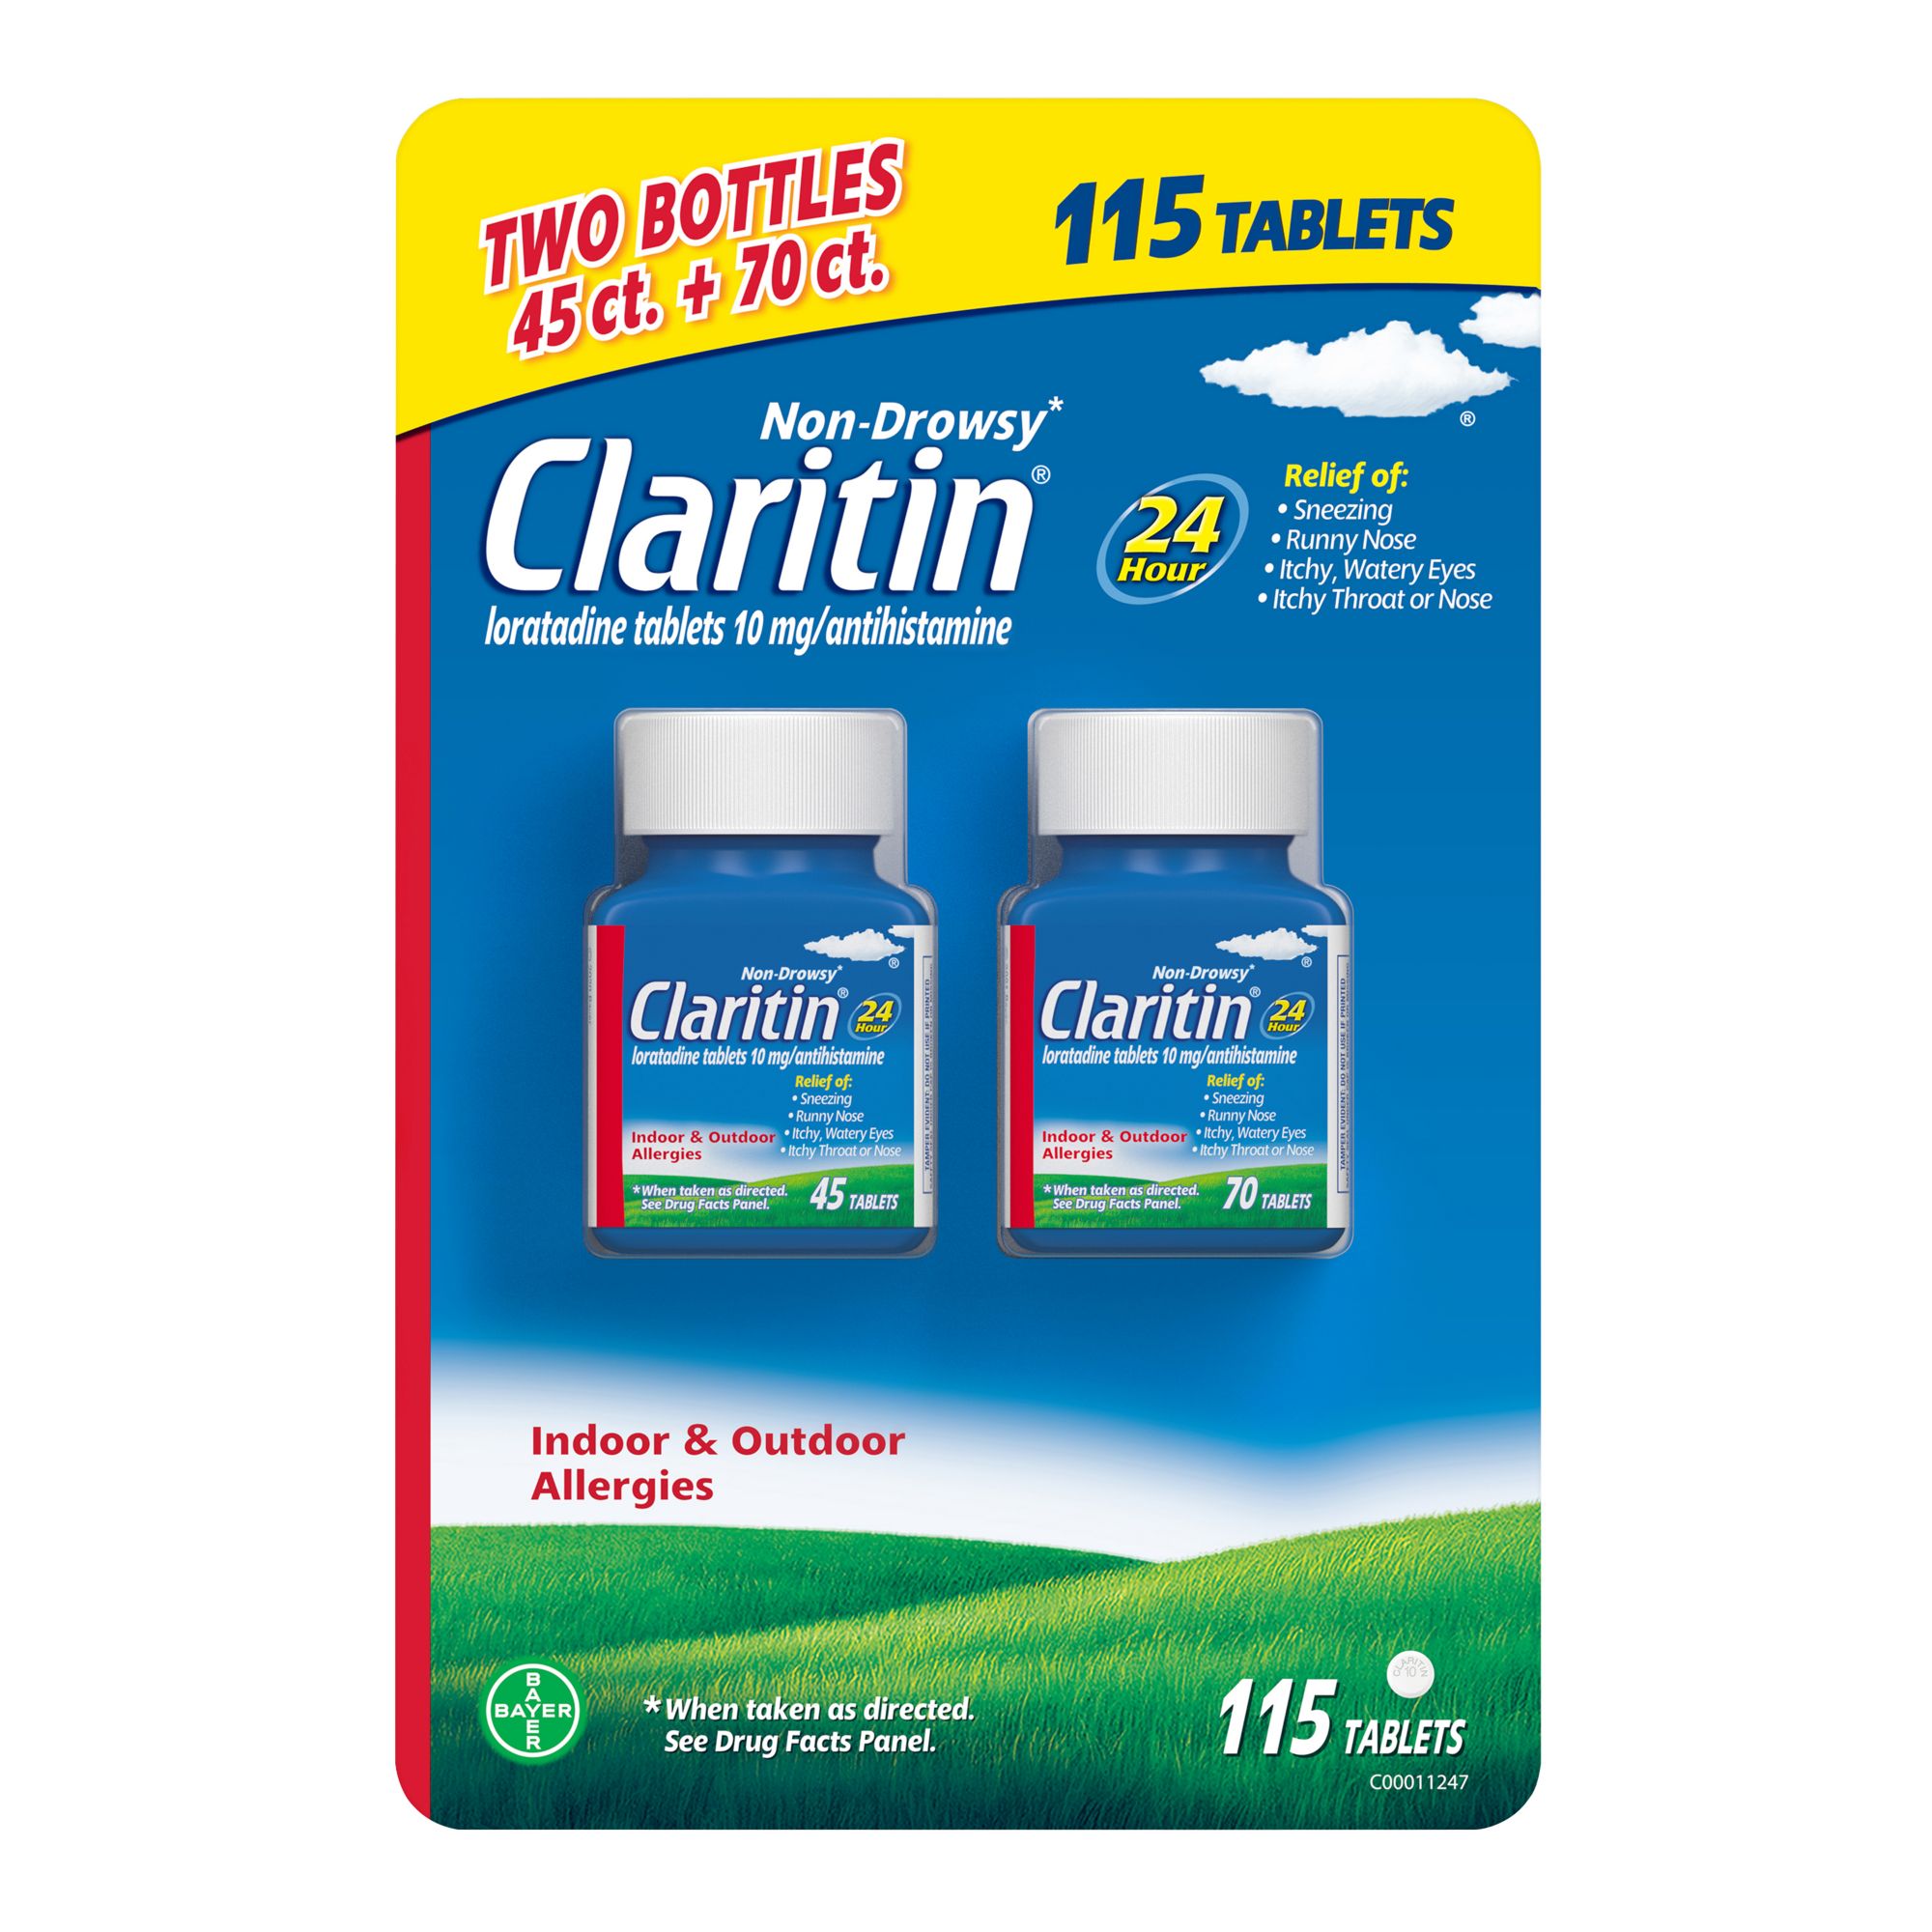 Claritin 24-Hour Non-Drowsy Allergy Tablets with Antihistamine and Loratadine, 115 ct./10mg